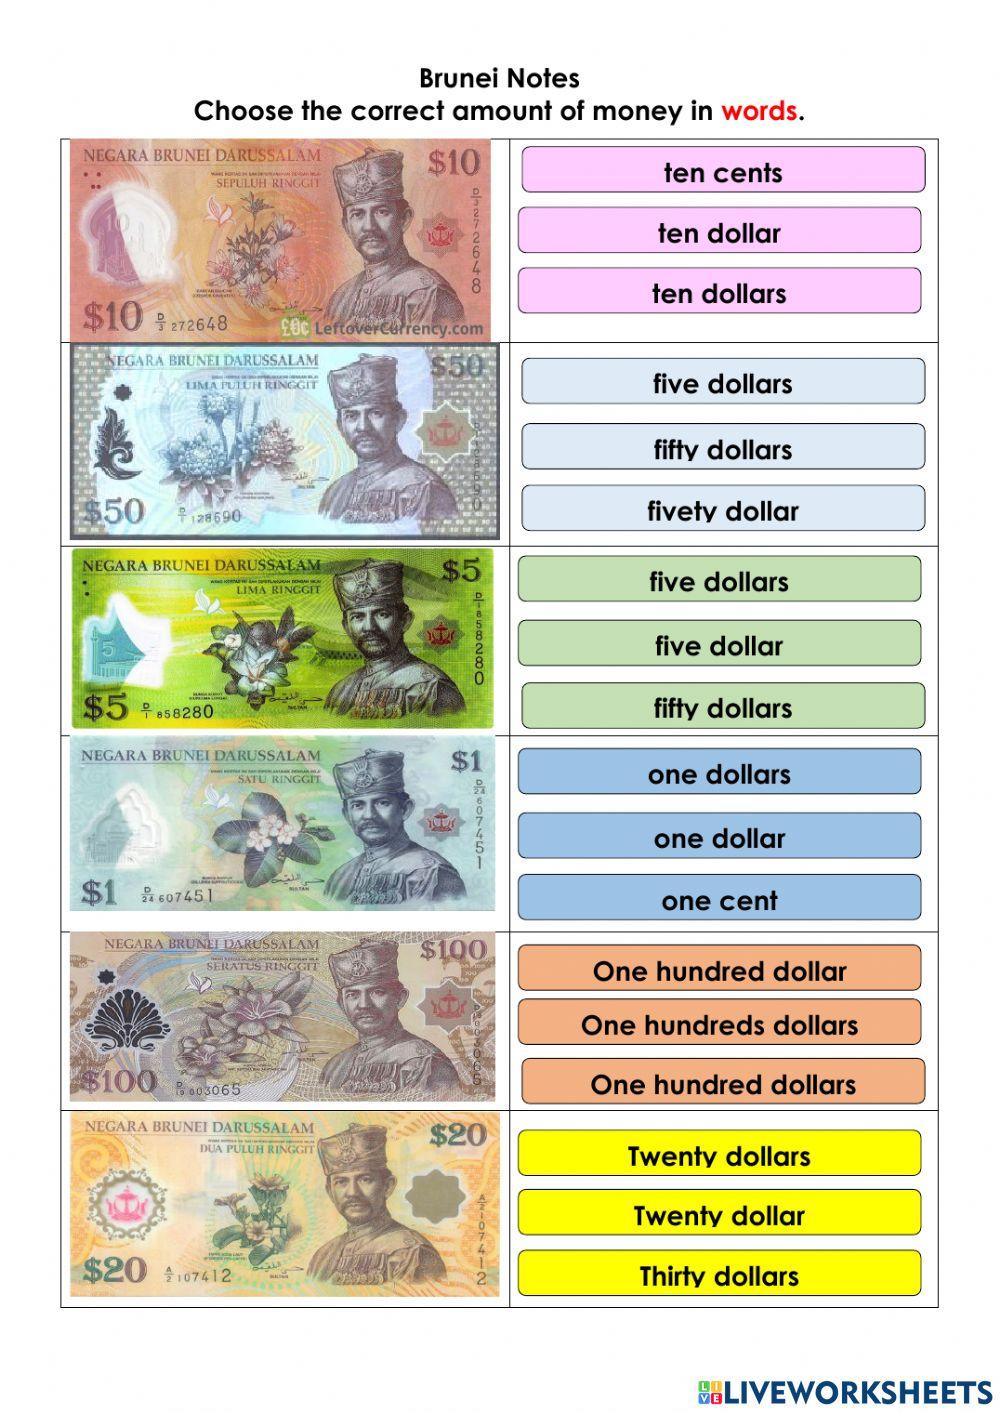 Brunei coins and notes